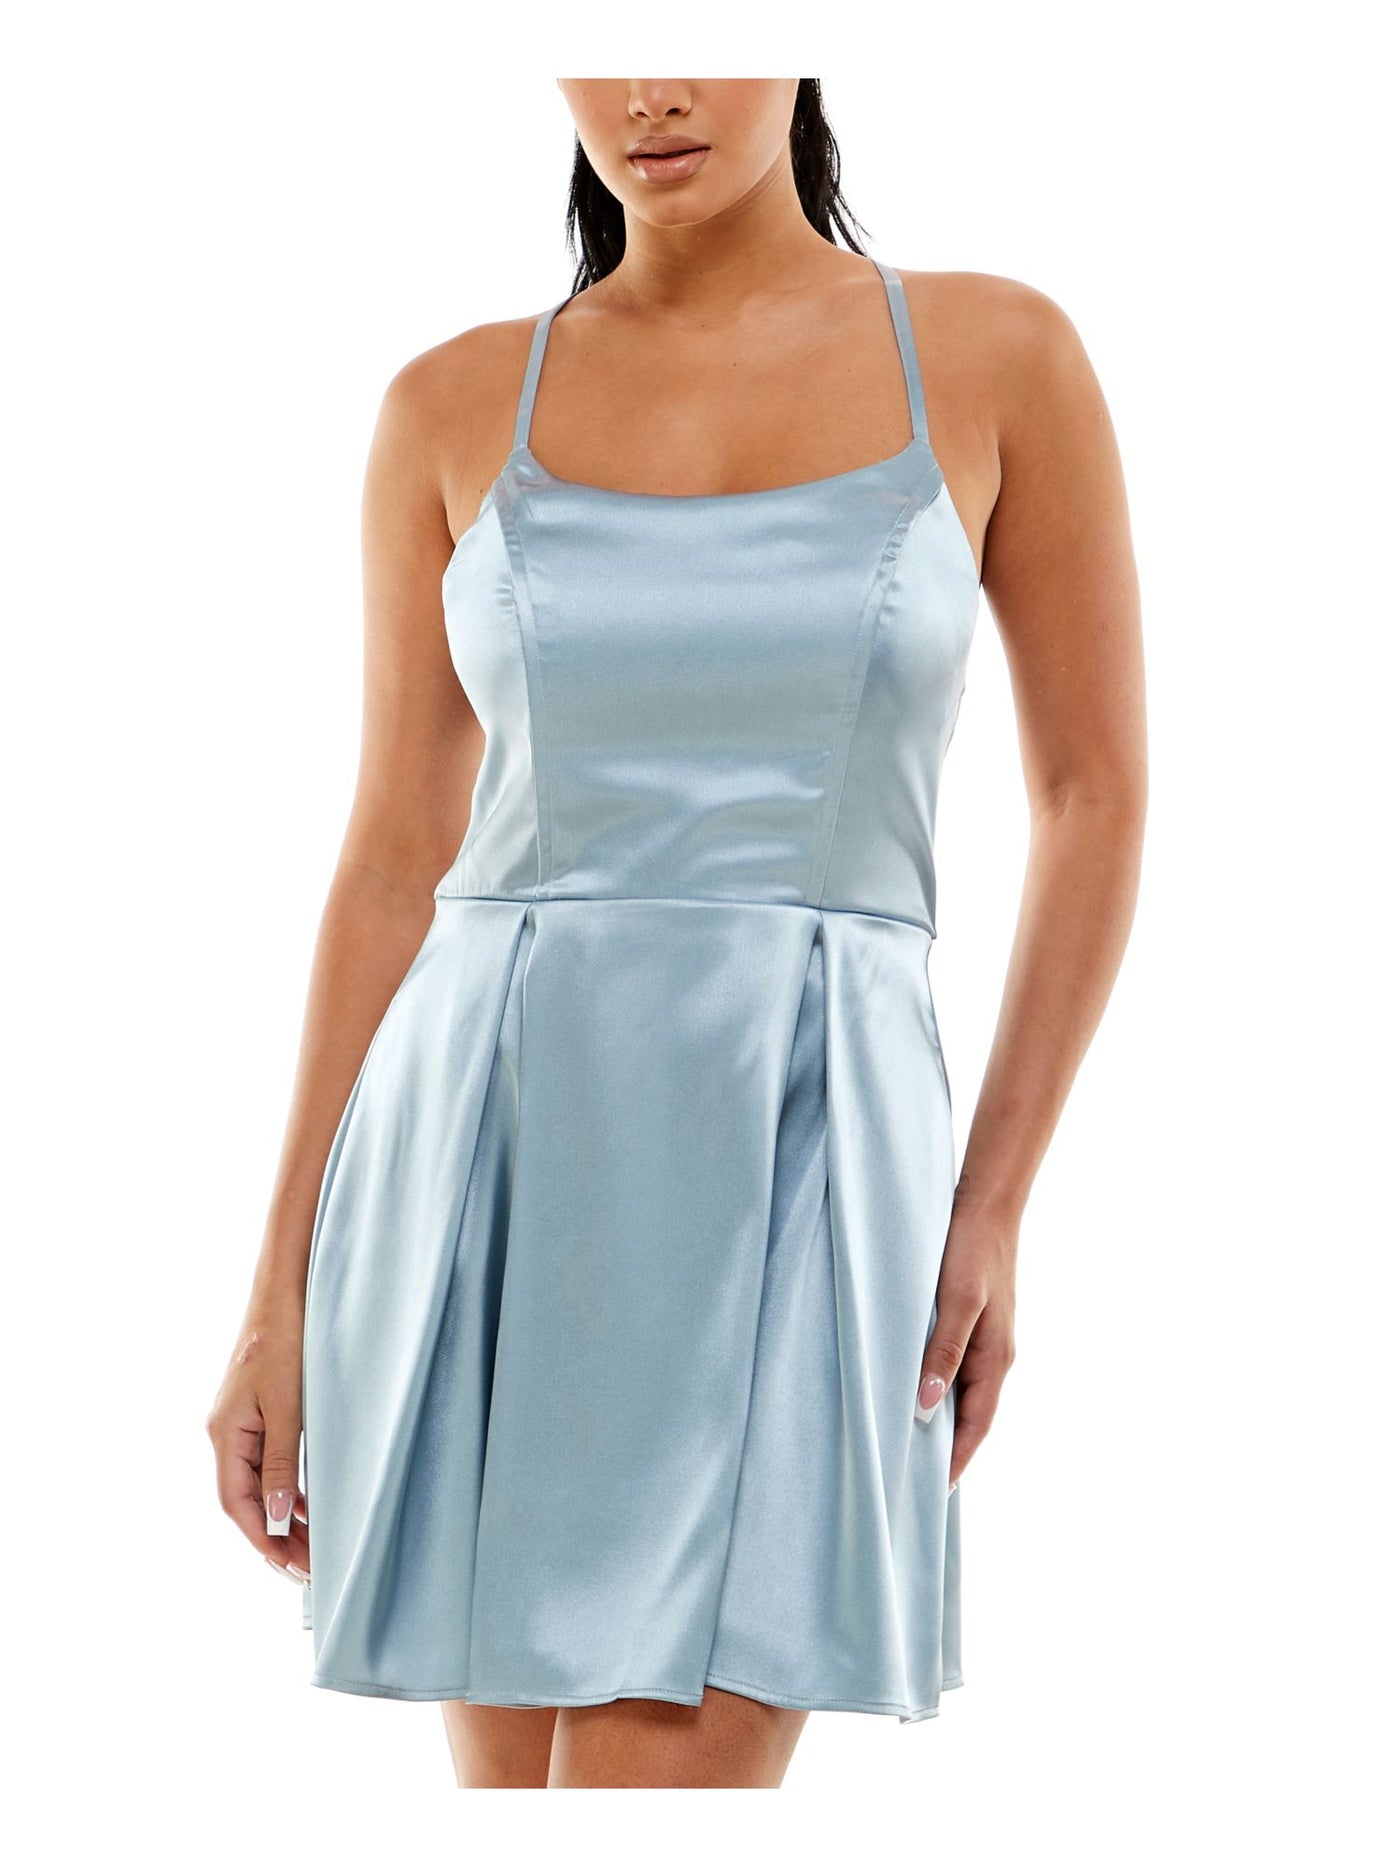 SPEECHLESS Womens Light Blue Stretch Zippered Pleated Strappy-back Satin Tie Spaghetti Strap Scoop Neck Mini Party Fit + Flare Dress Juniors 11